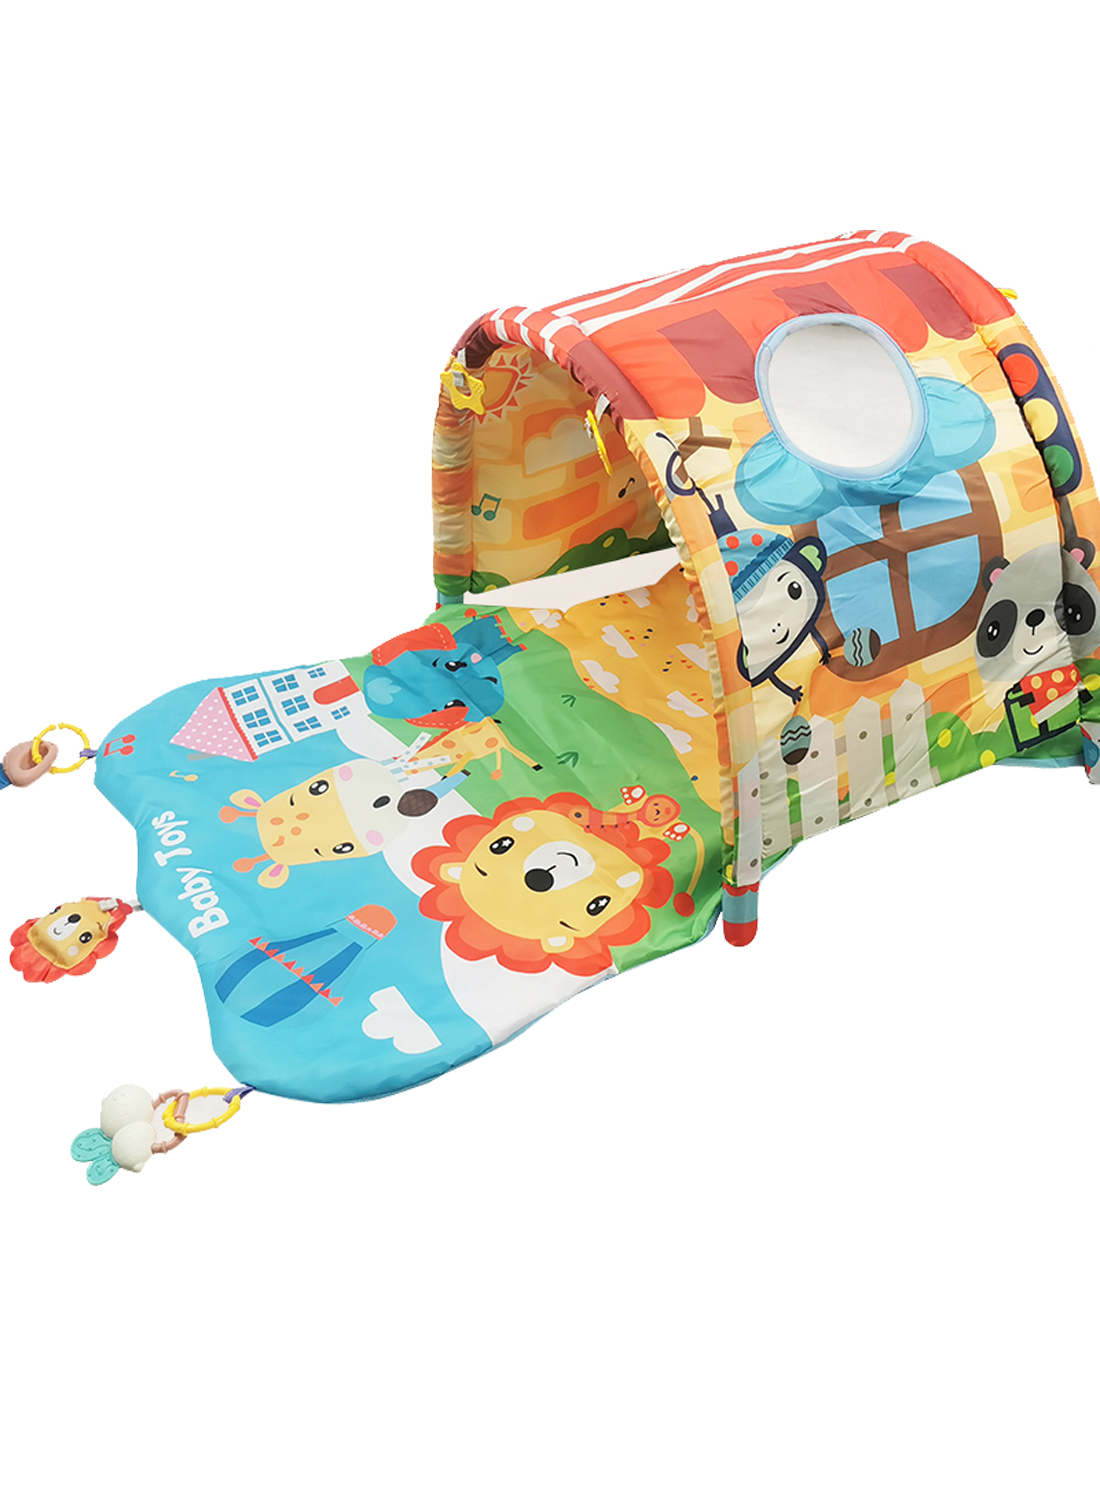 4-in-1 Baby Gym, Play Mat &amp; Play Gym, Combination Baby Activity Gym with Sensory Exploration and Motor Skill Development